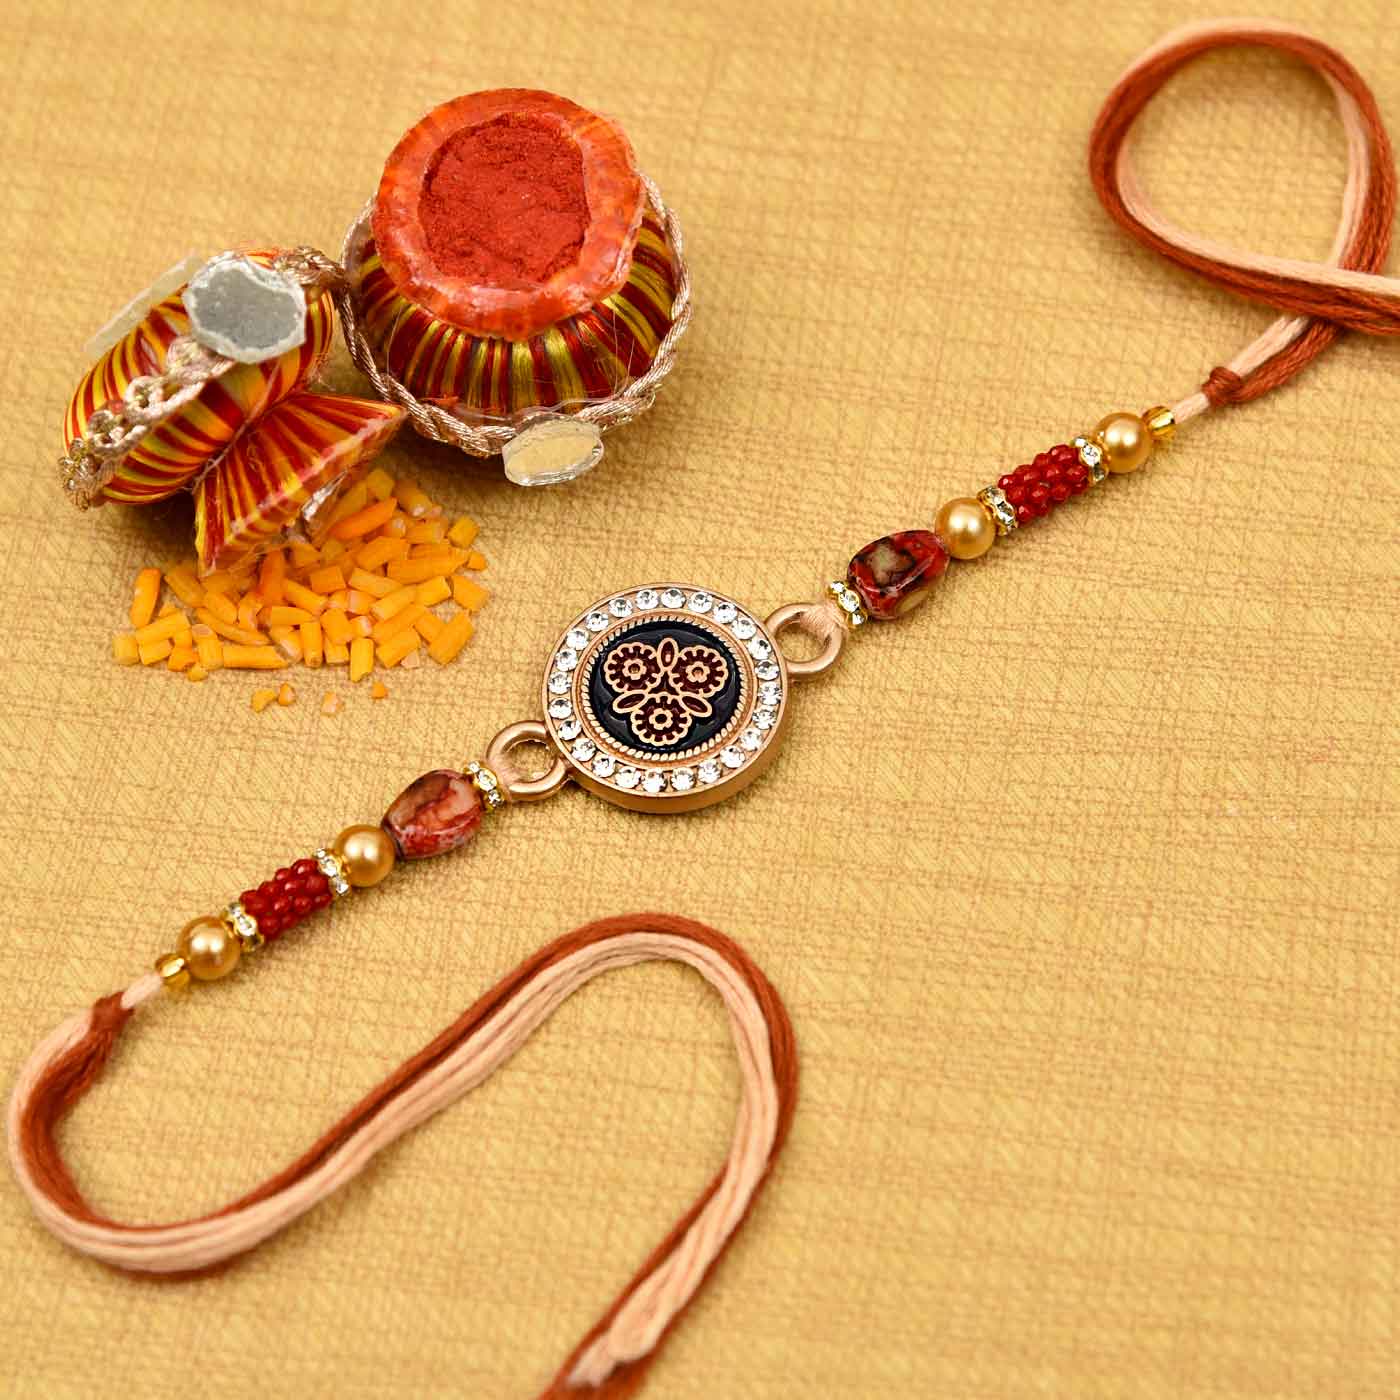 rakhi gifts for kids: 7 Rakhi Gifts Ideas for Kids: Find the Perfect Present  for Your Little Brother or Sister - The Economic Times